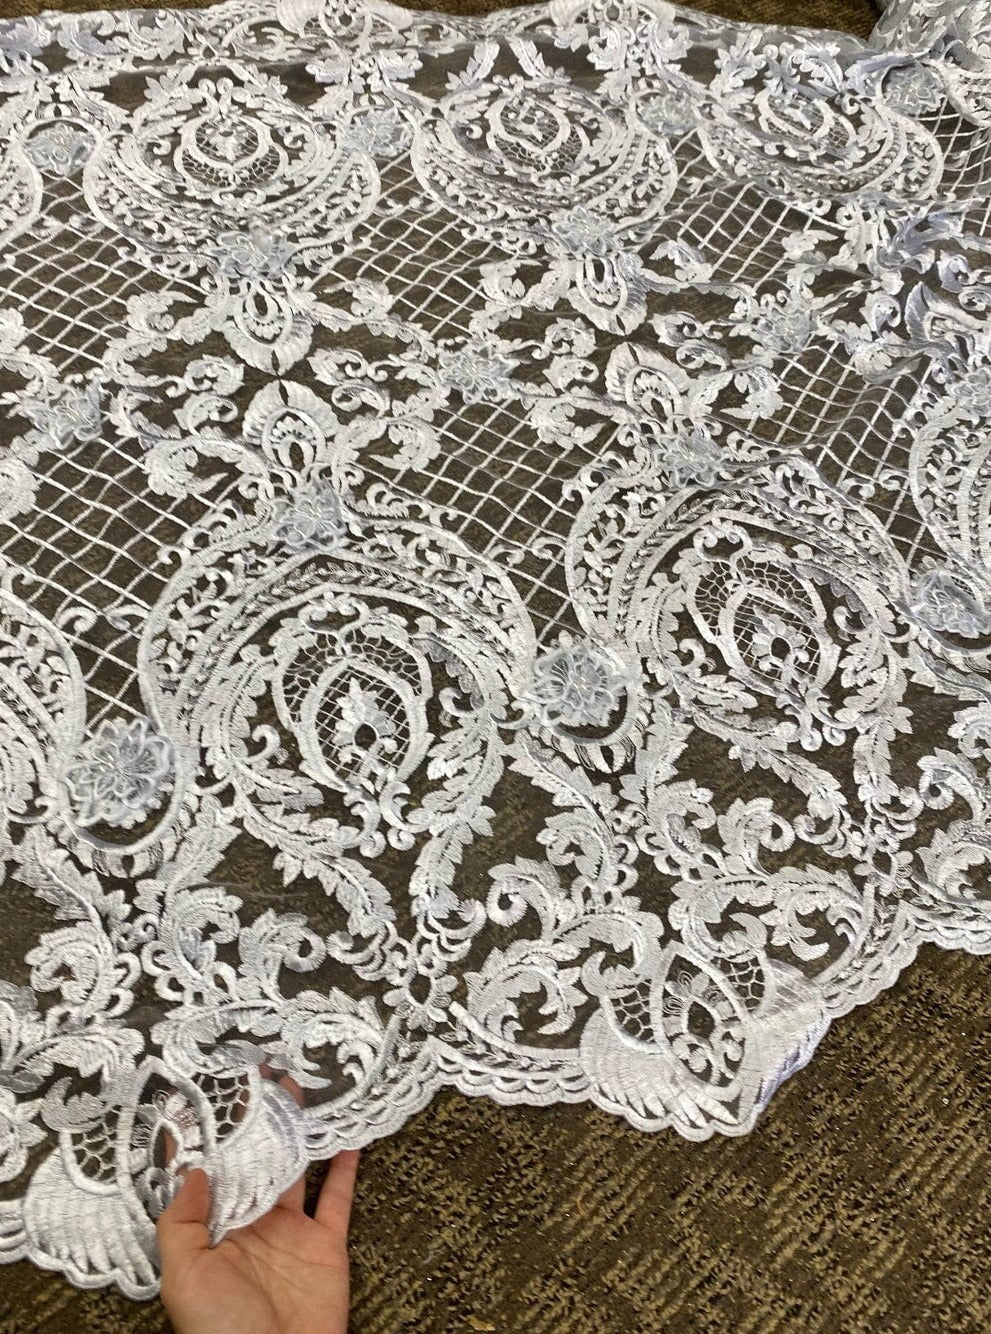 Silver Scallop Embroidery Lace, light silver Scallop Embroidery Lace, dark silver Scallop Embroidery Lace, Scallop Embroidery Lace for woman, Scallop Embroidery Lace for bride, Scallop Embroidery Lace for gown, Scallop Embroidery Lacein low price, premium Scallop Embroidery Lace, cheap Scallop Embroidery Lace